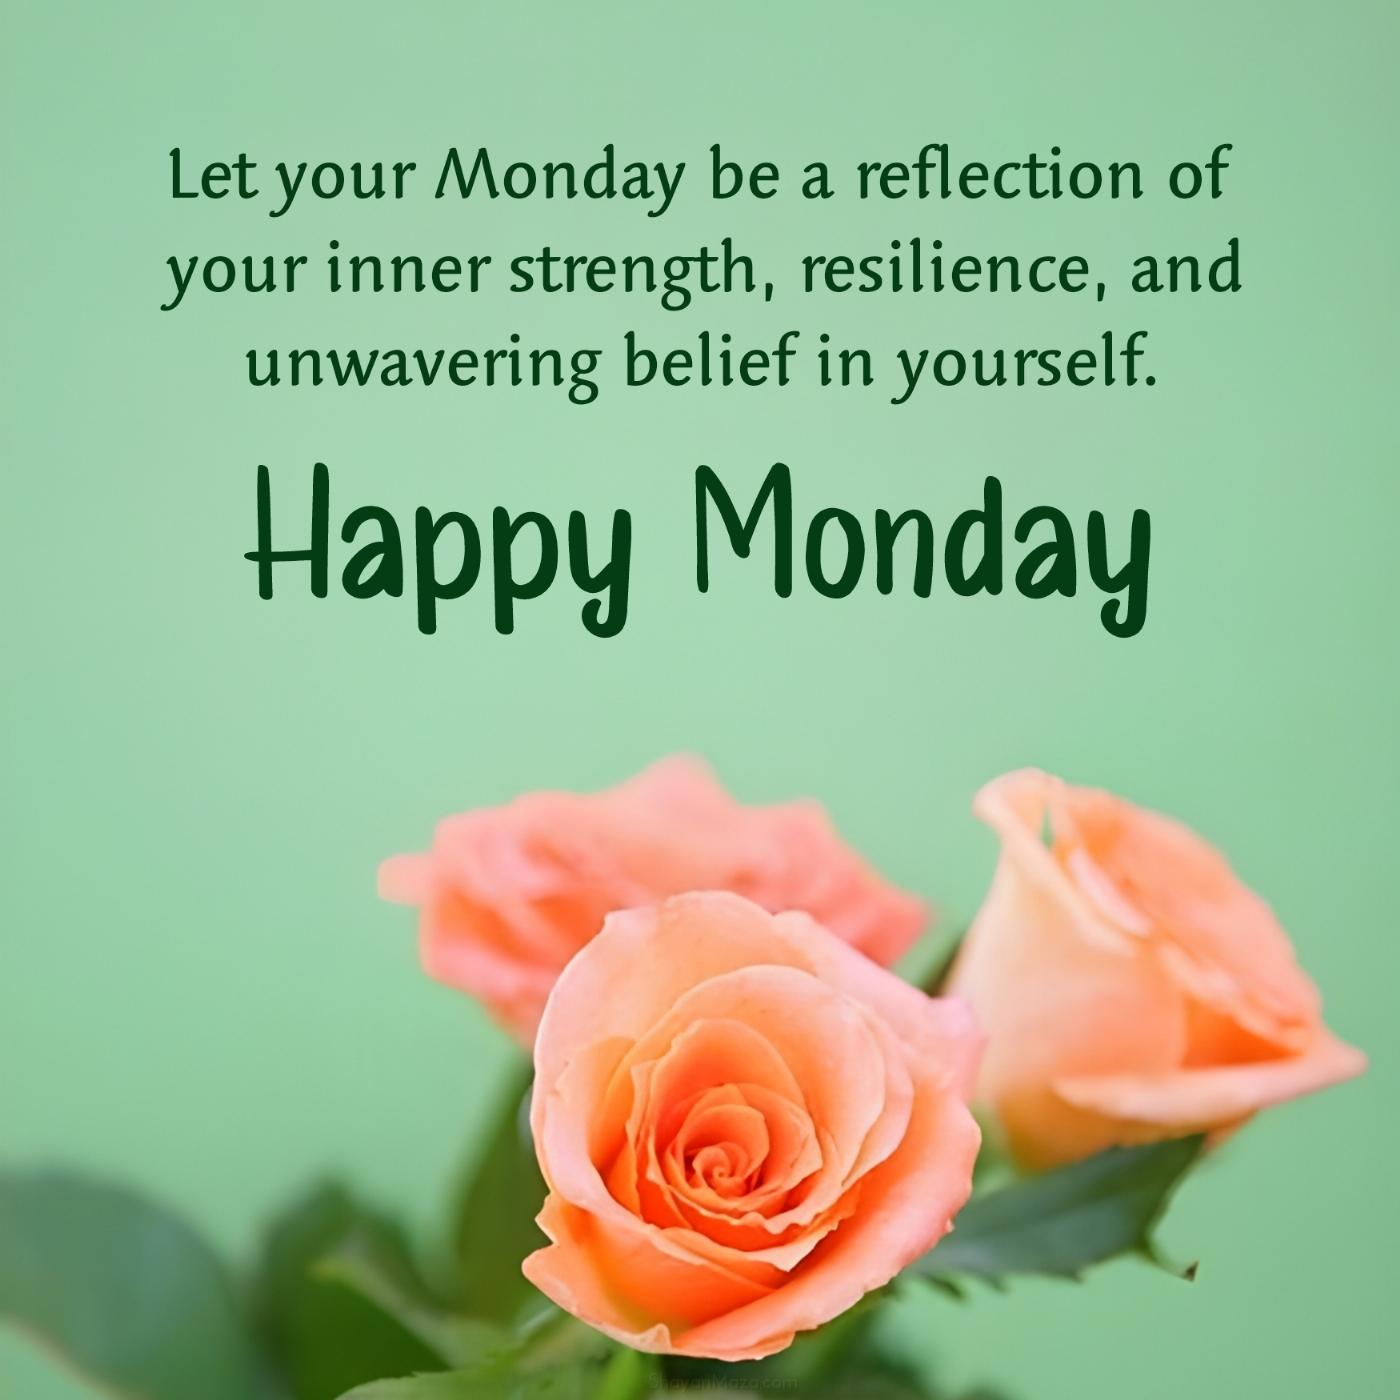 Let your Monday be a reflection of your inner strength